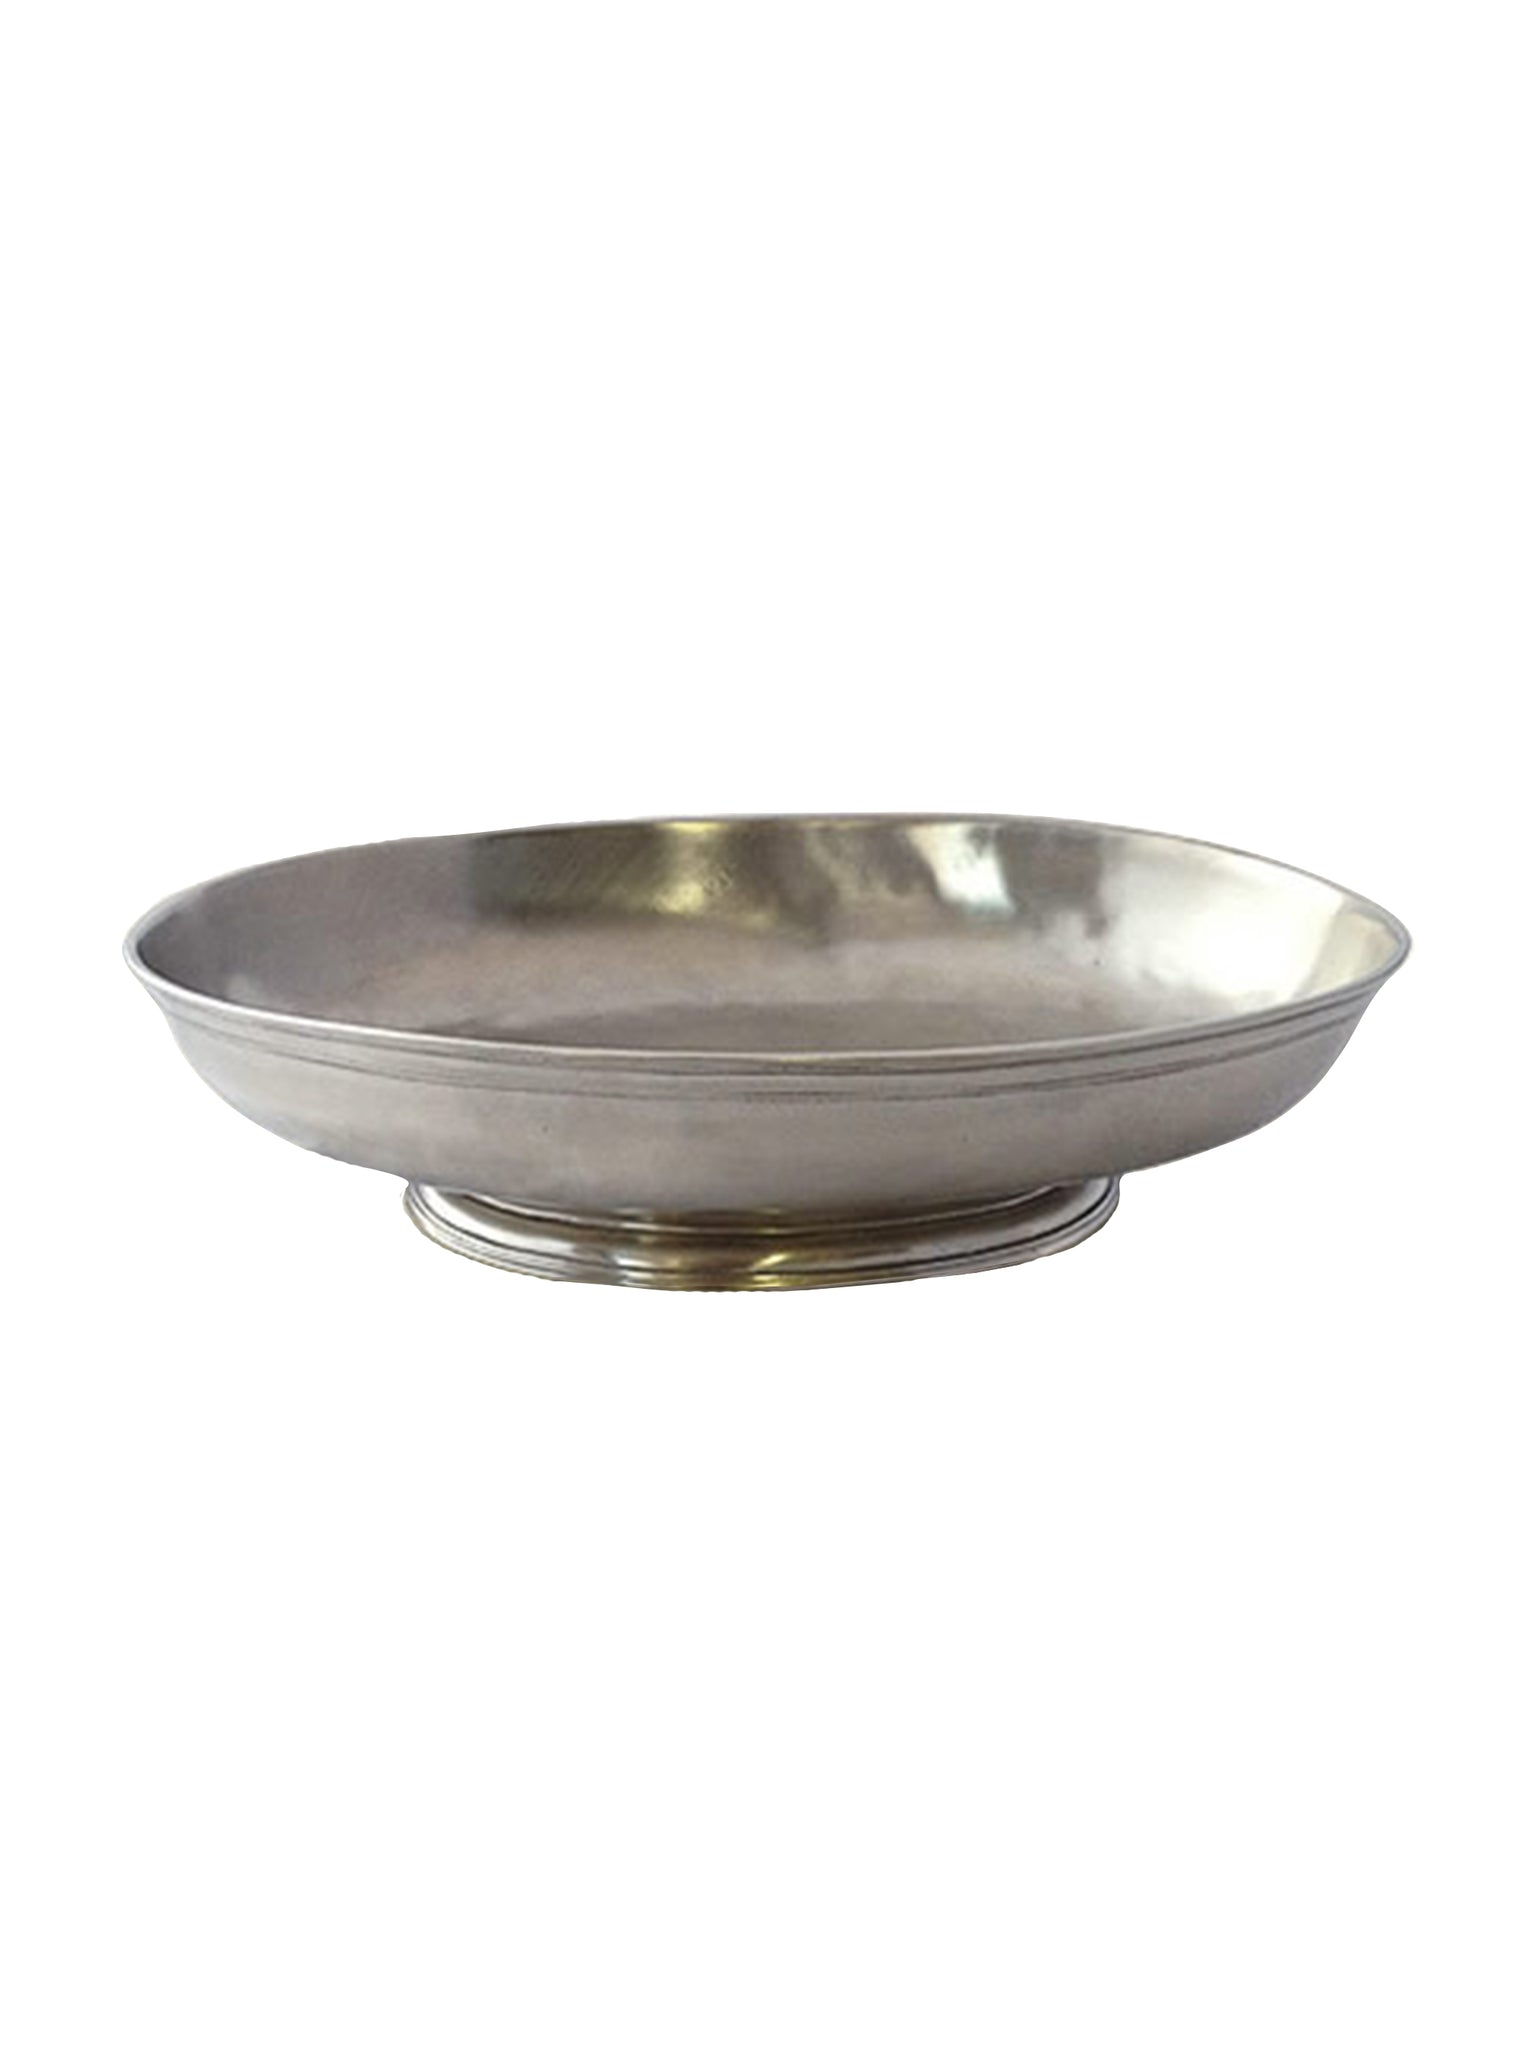 MATCH Pewter Low Footed Oval Centerpiece Weston Table